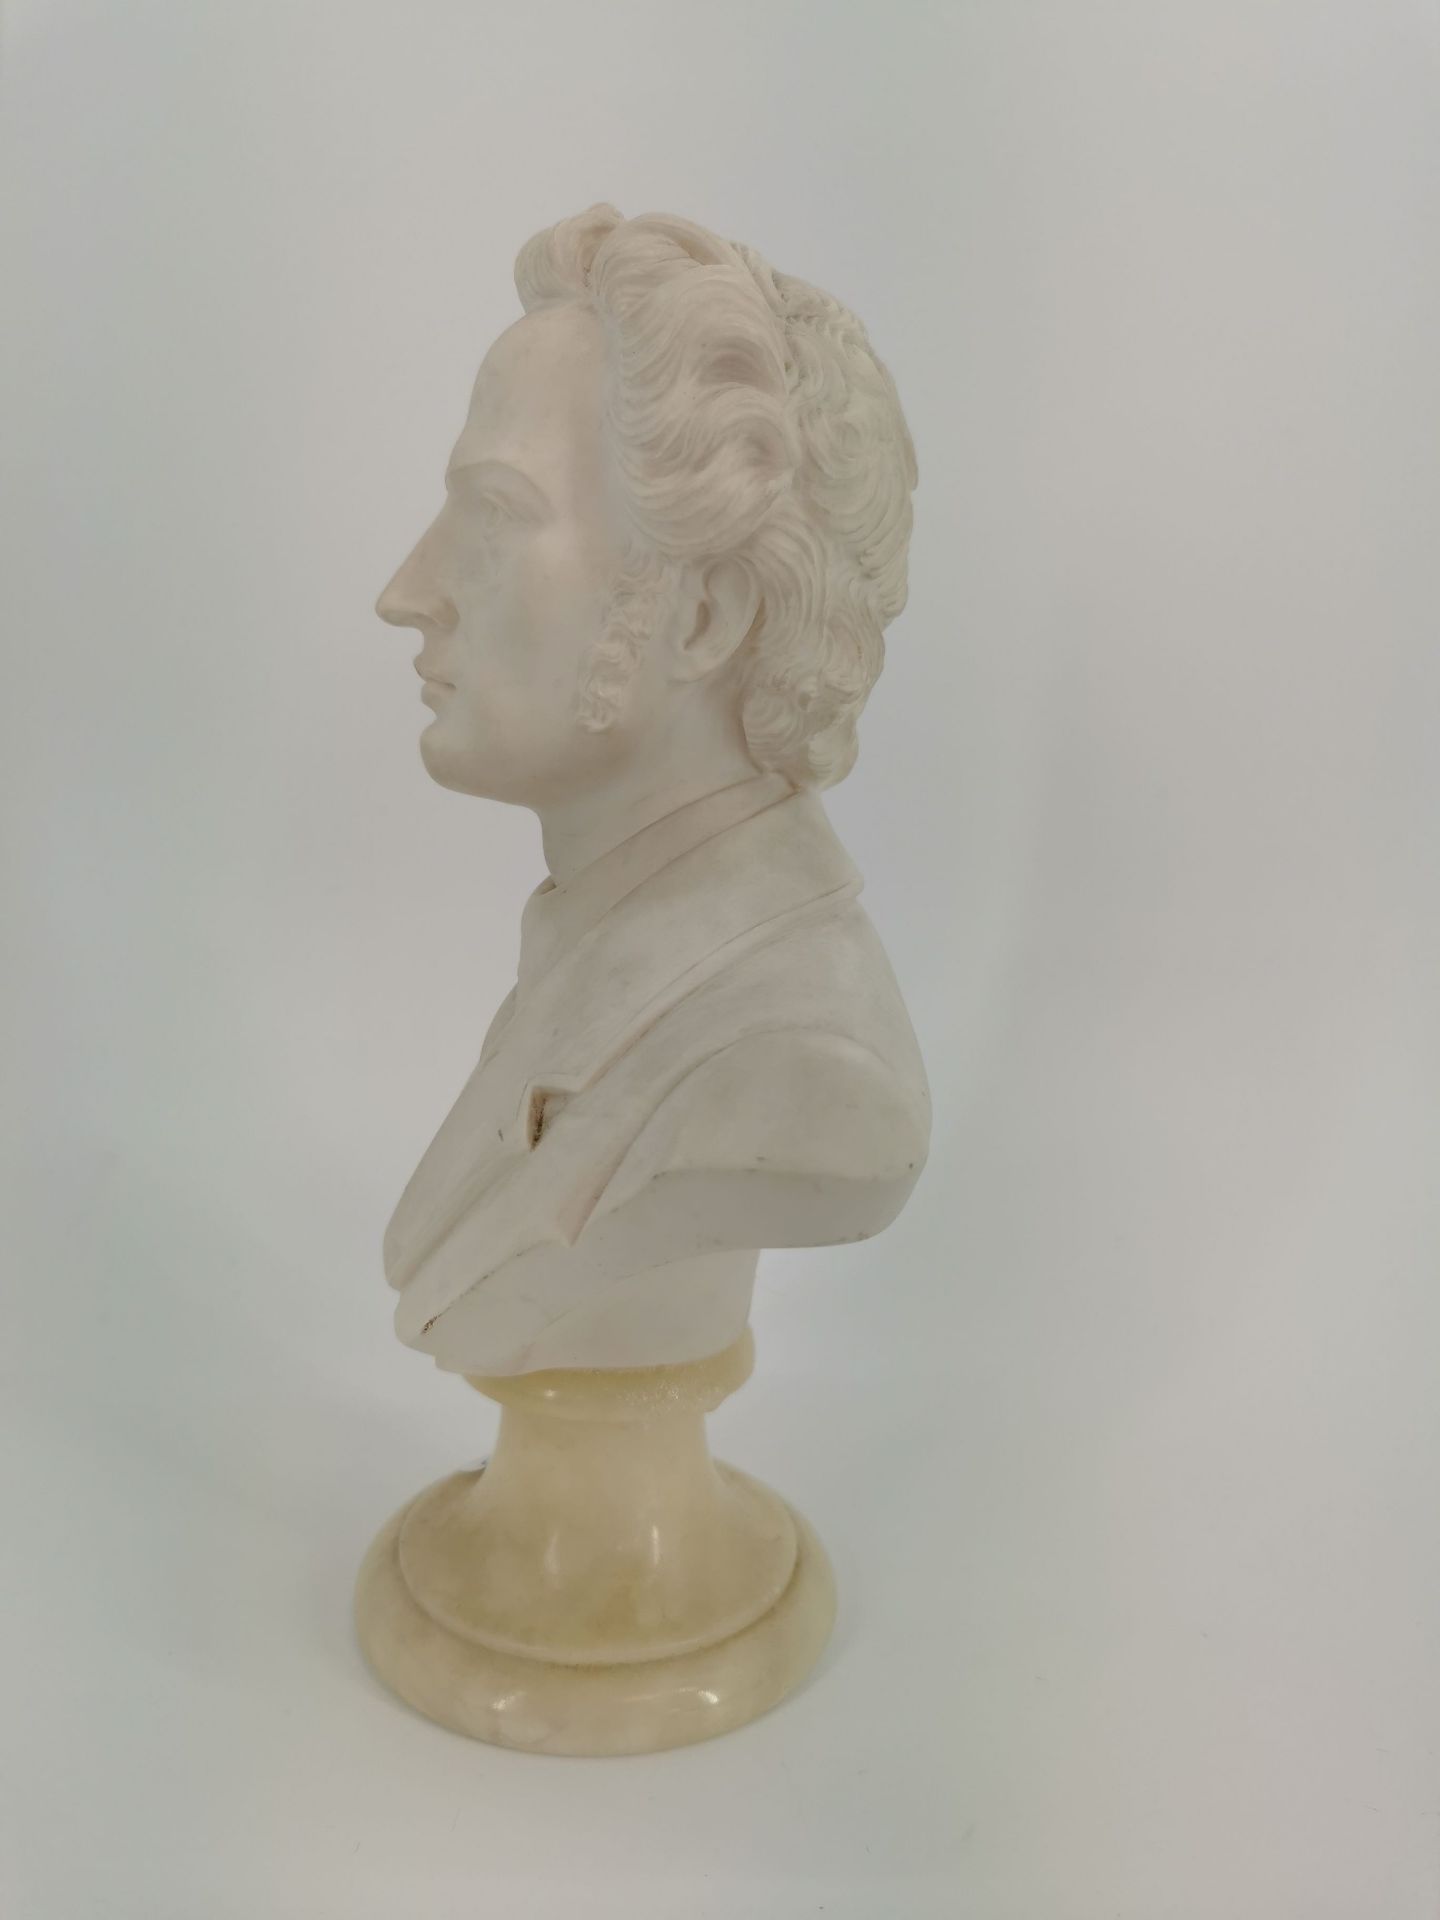 BUST "CHOPIN" - Image 4 of 6